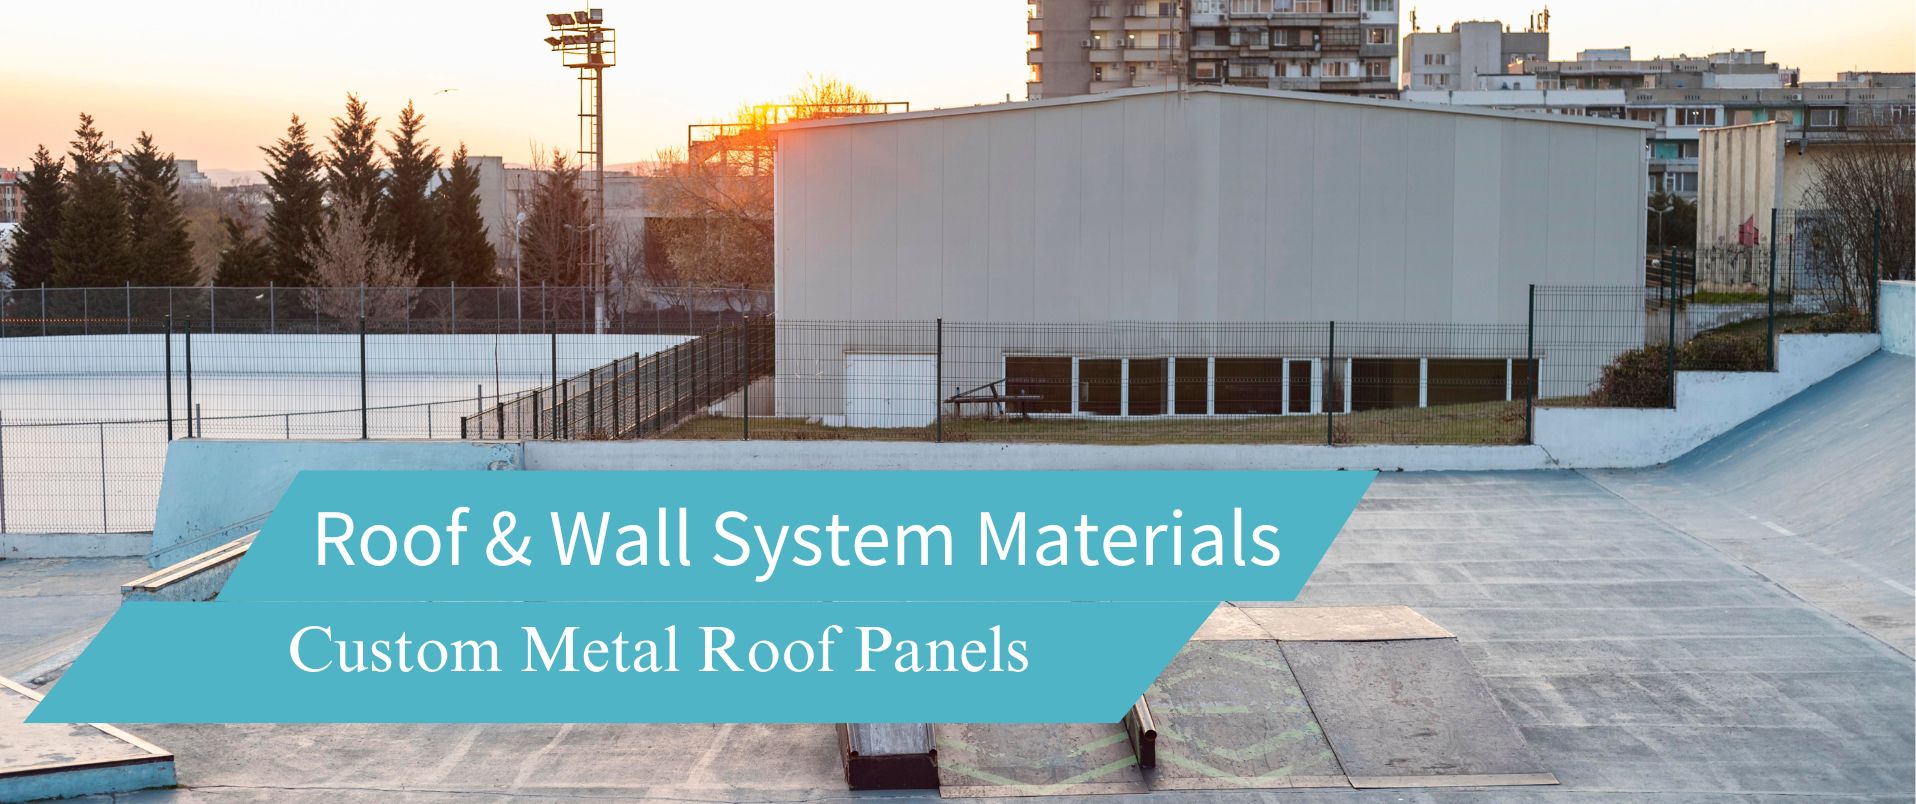 roof and wall system matrials